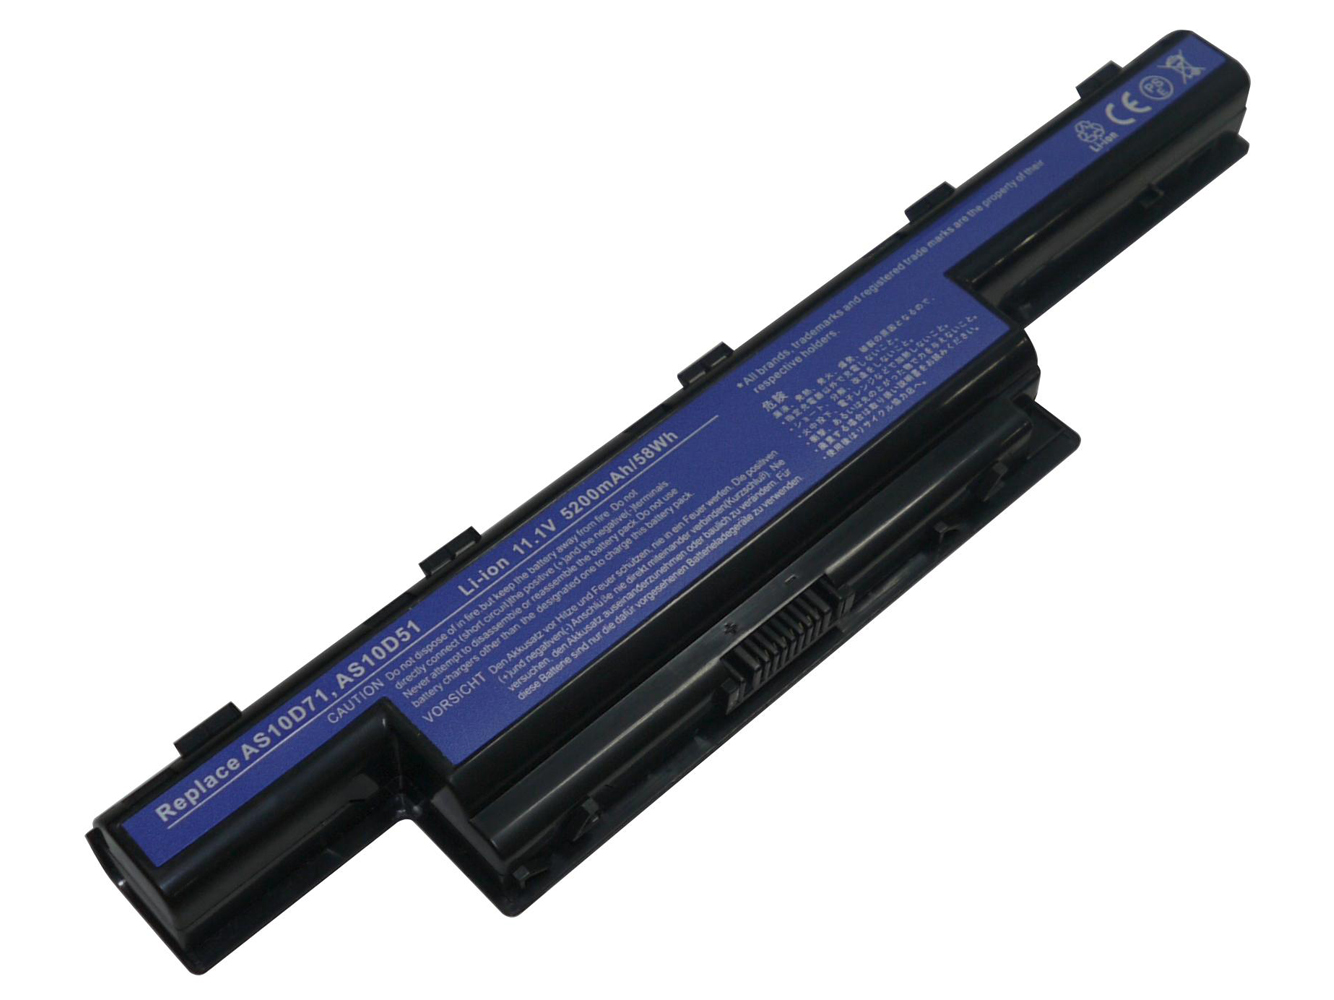 Acer 31cr19/65-2, 31cr19/652 Laptop Batteries For Acer Travelmate P243, Aspire 4250 replacement